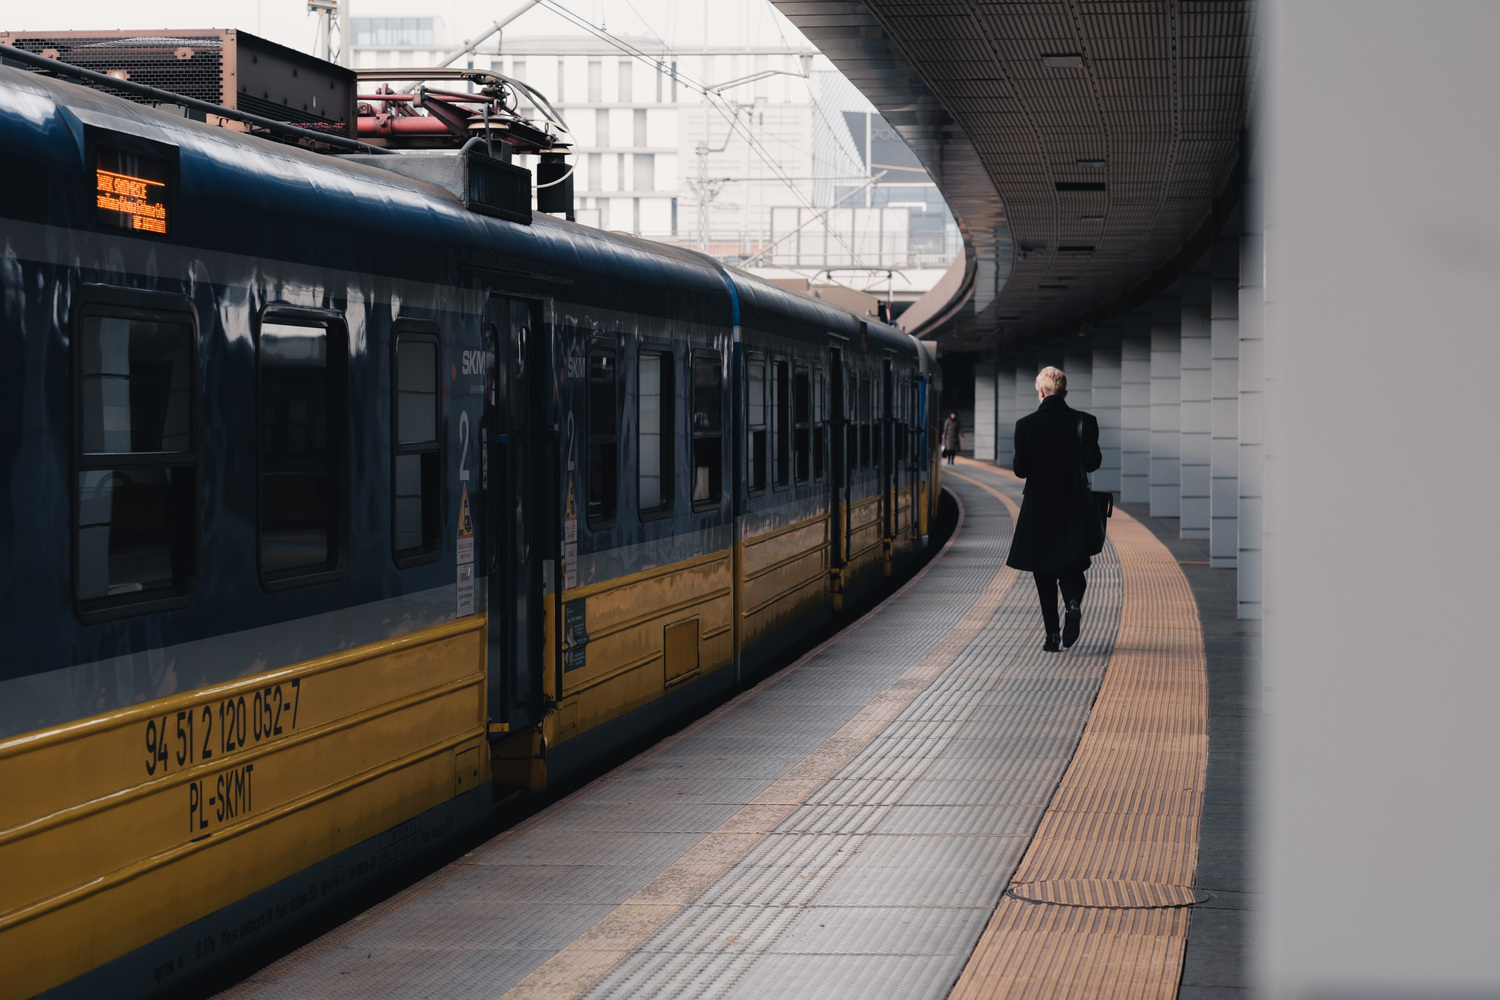 A curved train station. A blue/yellow train stands on the left side. A person with dark clothes and short blond hair walks away from the camera. The pillars of the train station form a curve.